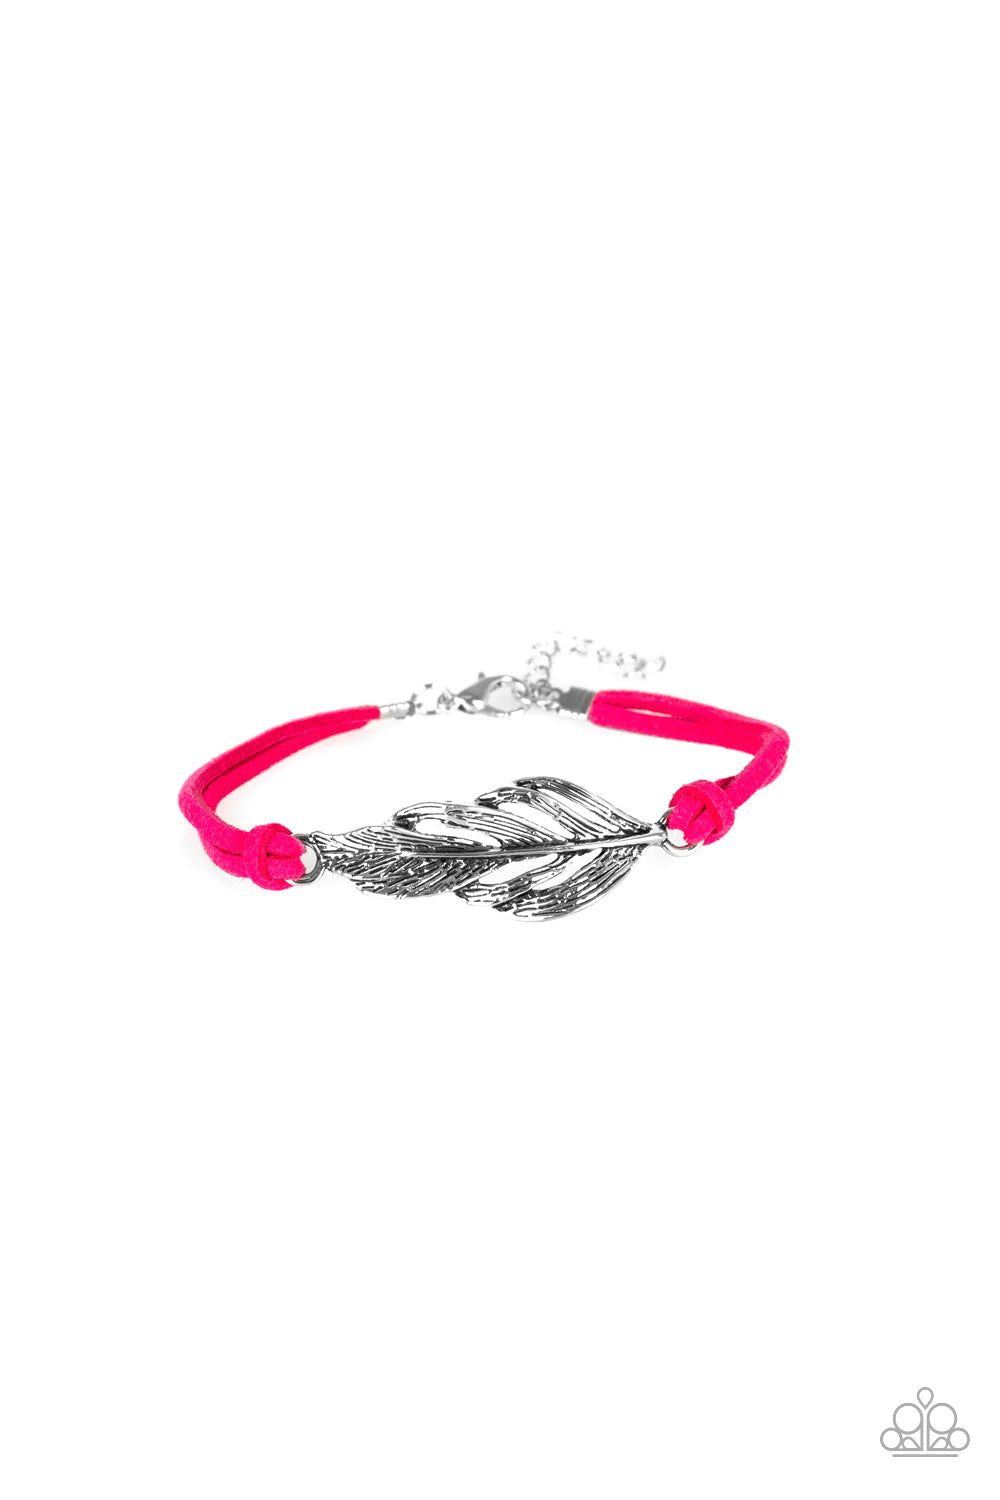 FASTER THAN FLIGHT - PINK SUEDE SILVER FEATHER BRACELET